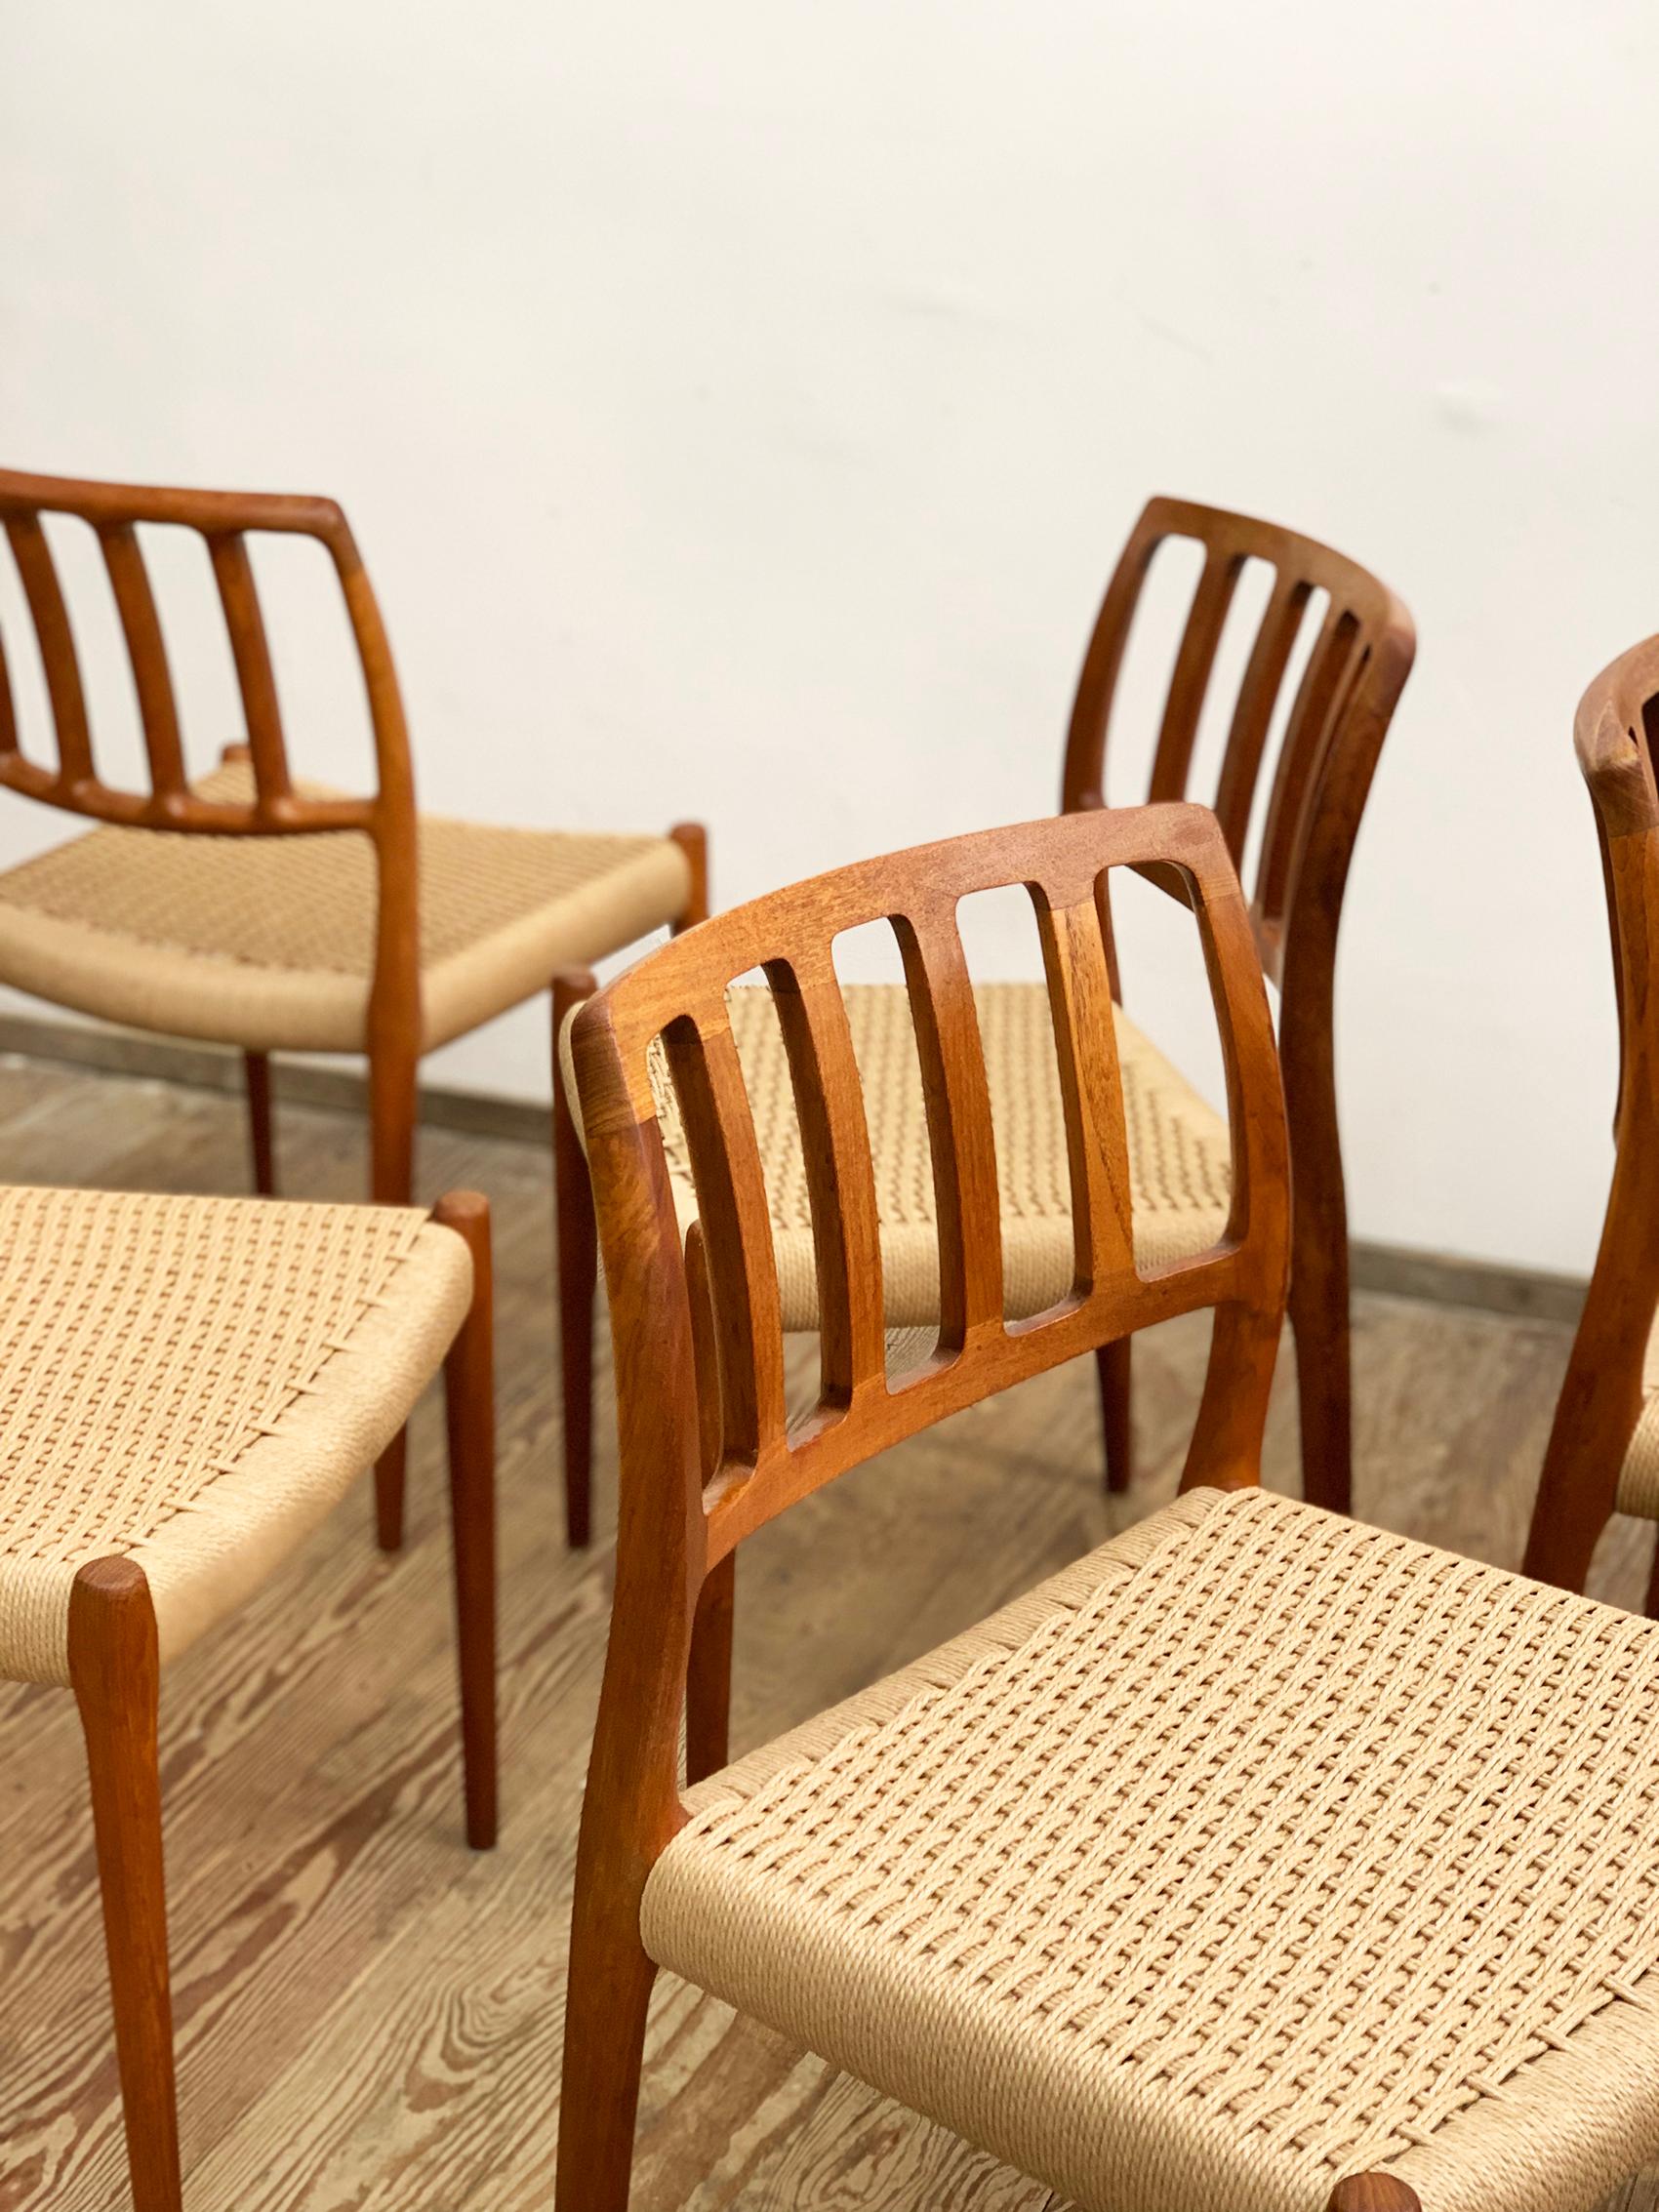 Late 20th Century Midcentury Teak Dining Chairs #83 by Niels O. Møller for J. L. Moller, Set of 6